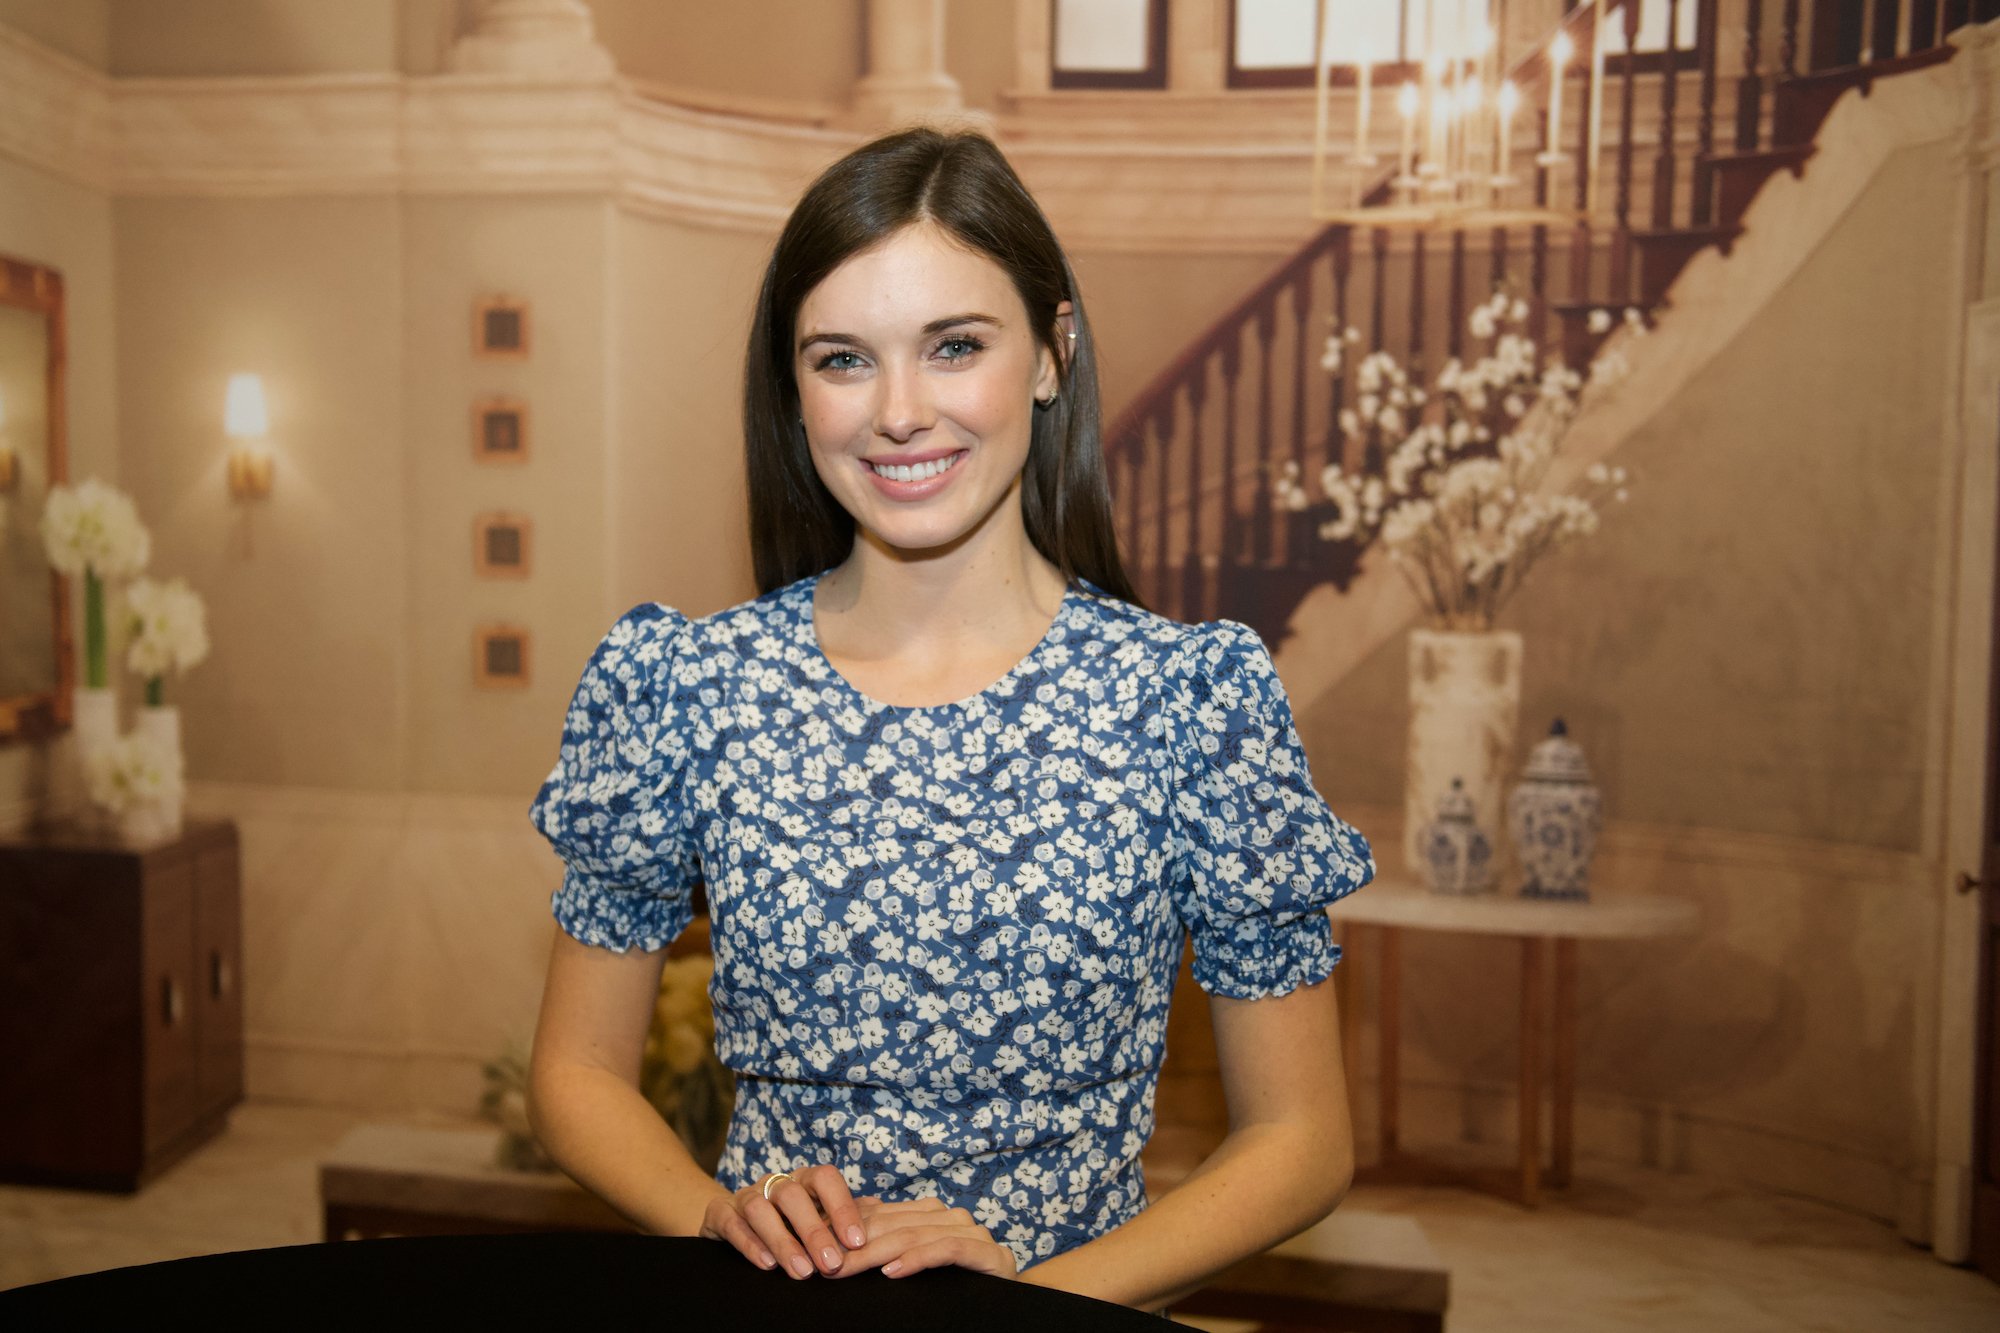 Katelyn MacMullen smiling in front of a staircase backdrop